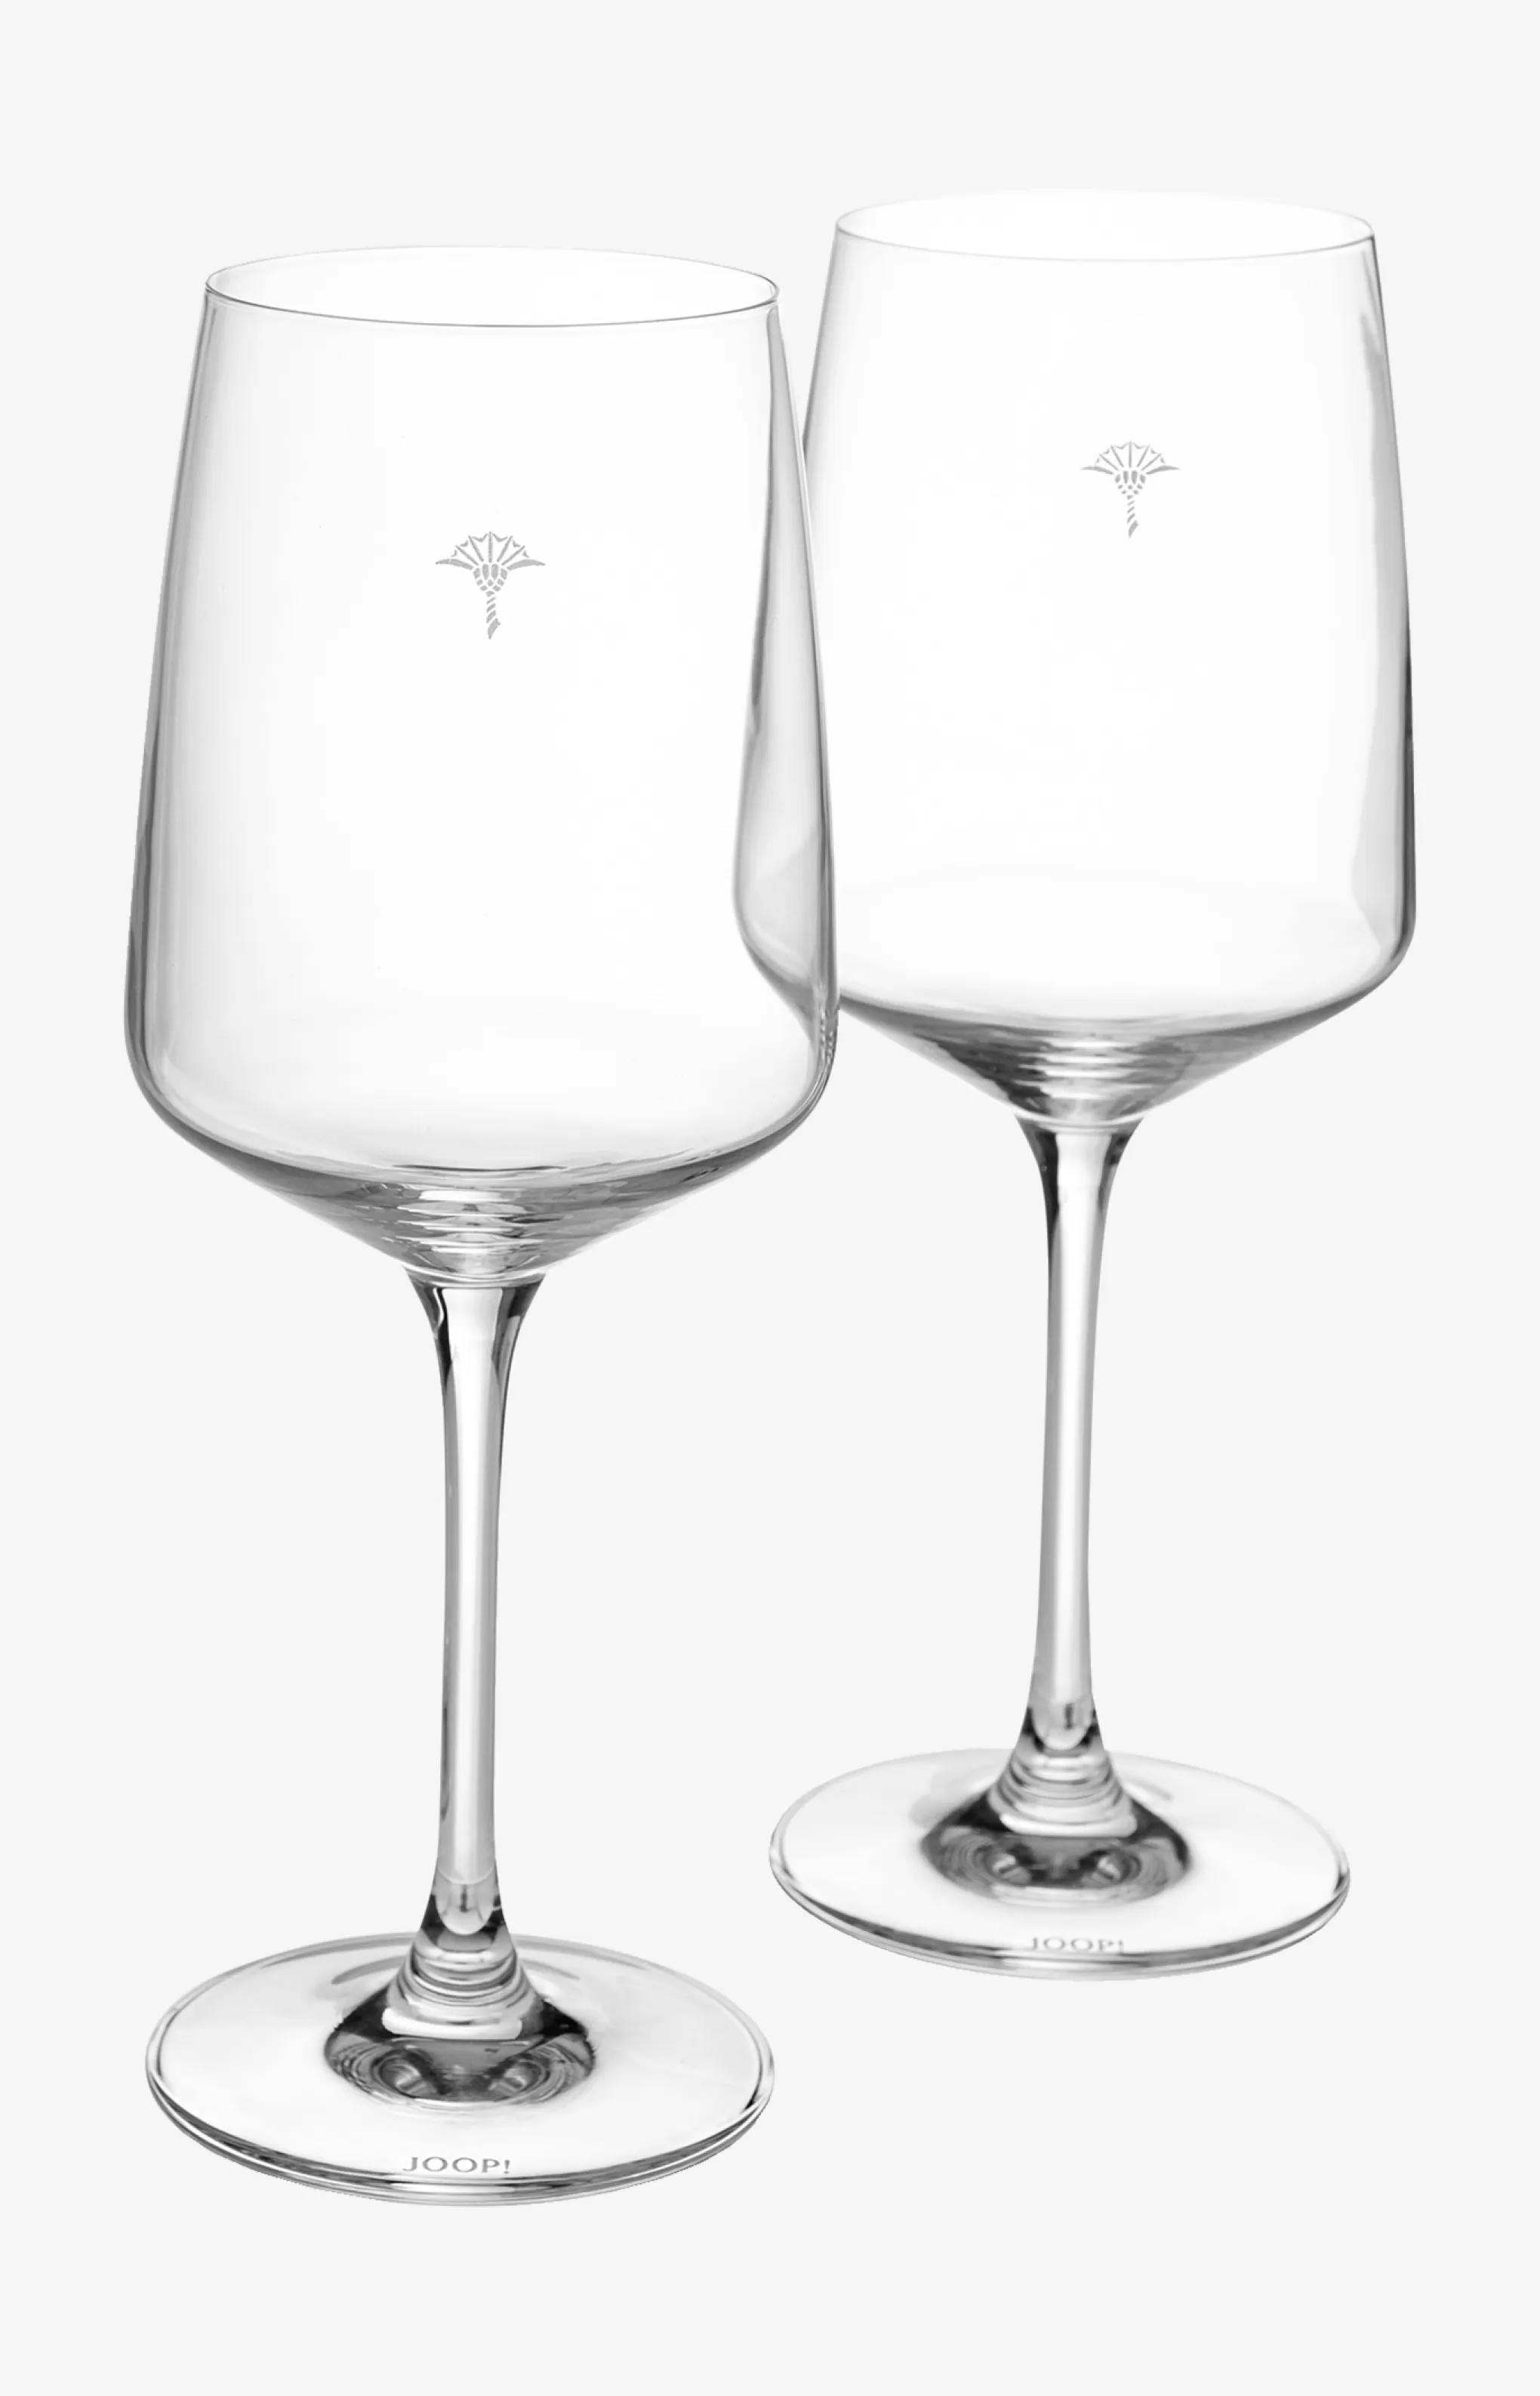 Glassware | Discover Everything*JOOP Glassware | Discover Everything Single Cornflower white wine glass - set of 2